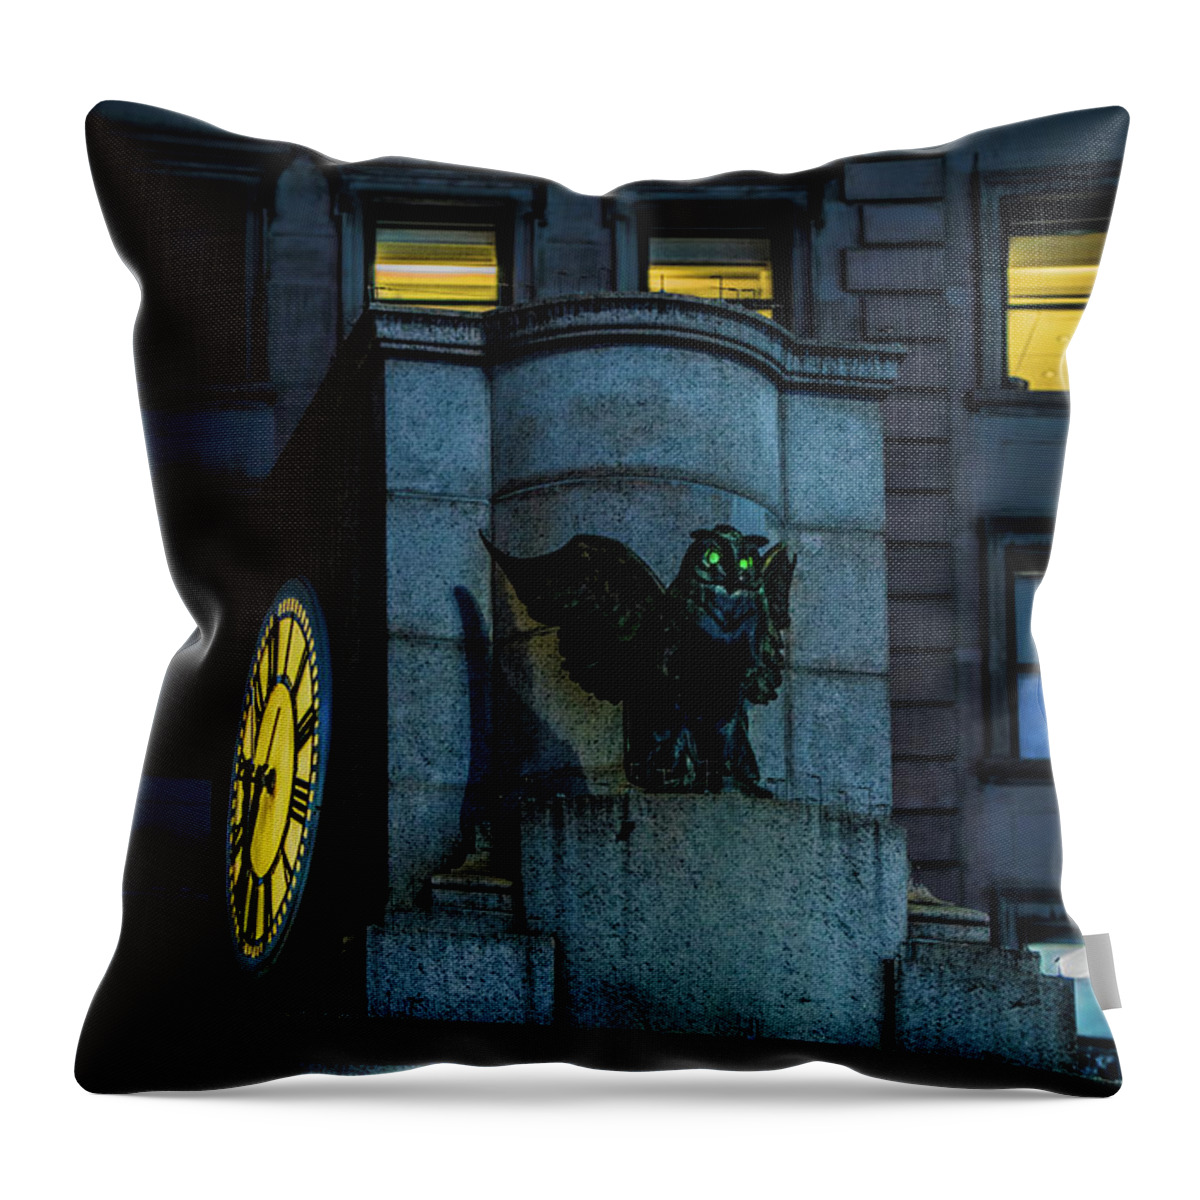 Herald Square Throw Pillow featuring the photograph The Herald Square Owl by Chris Lord